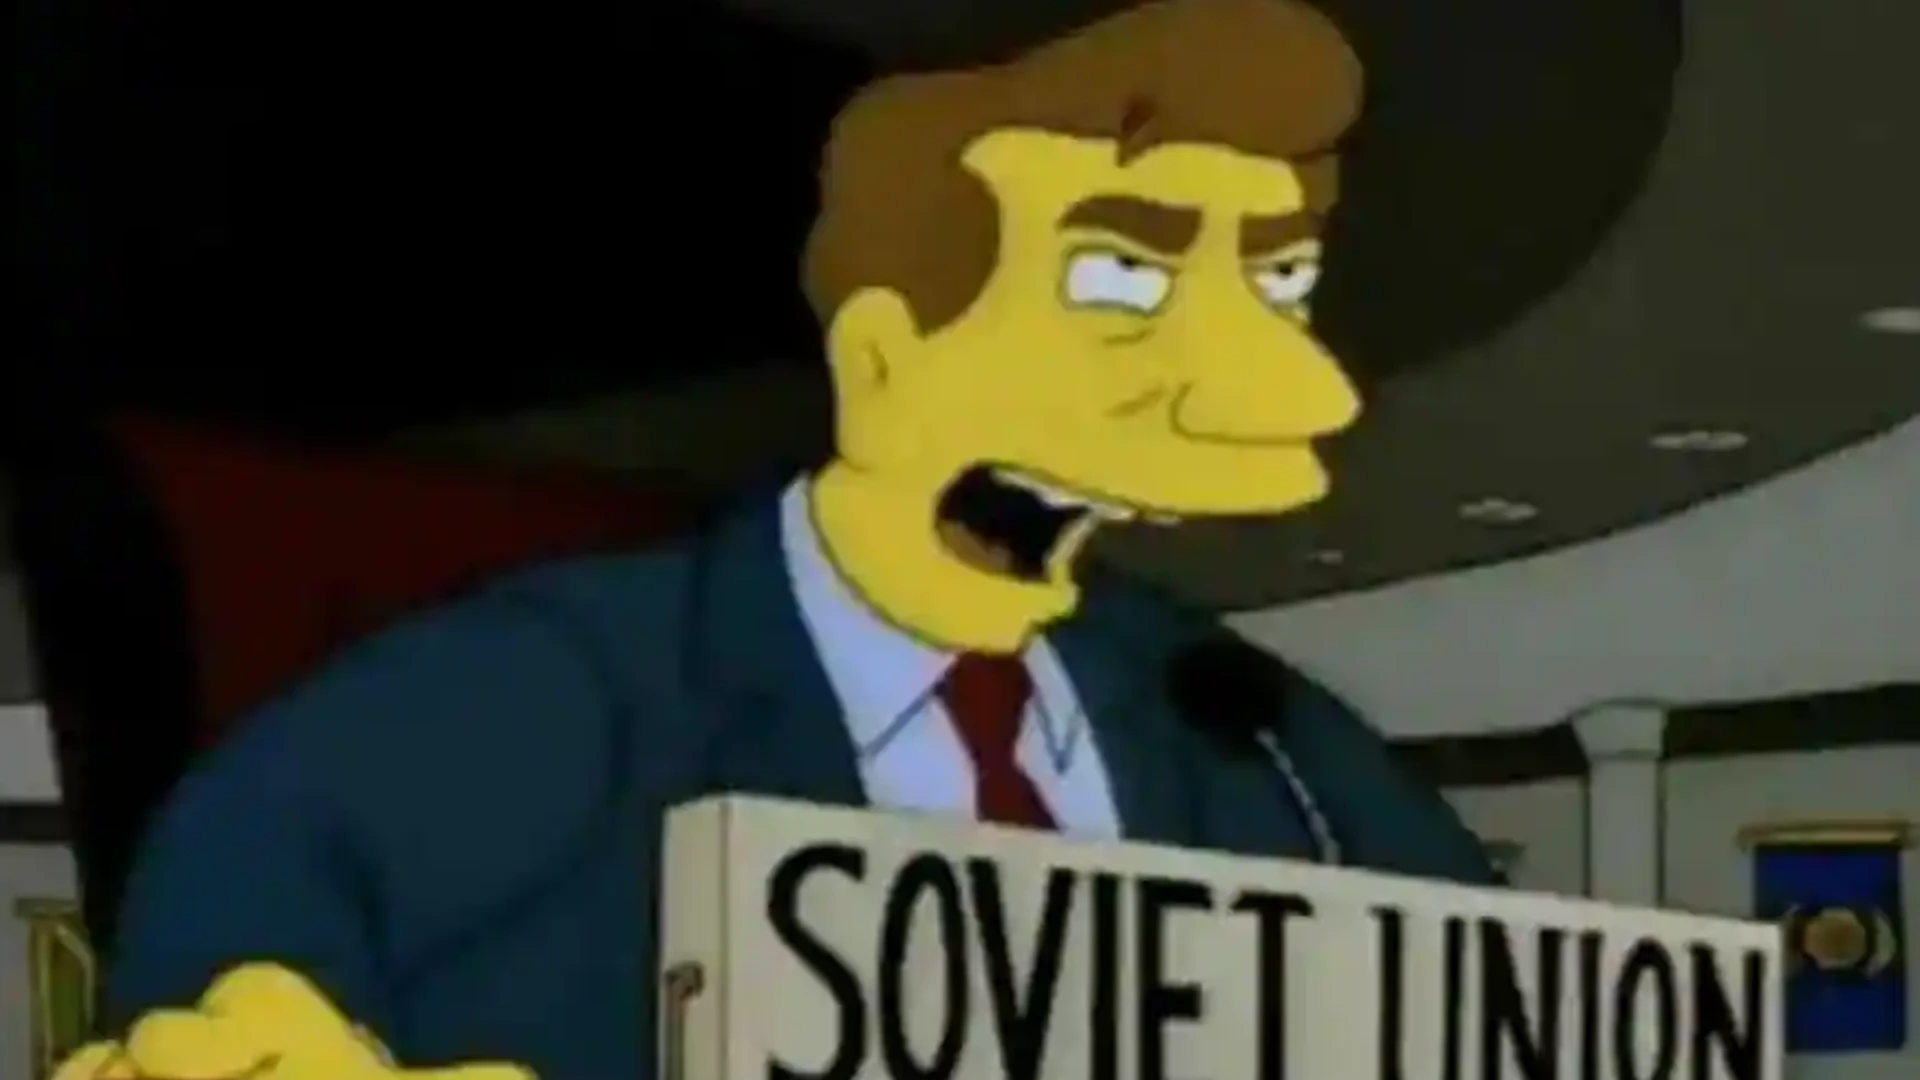 Russia-Ukraine crisis was predicted by The Simpsons in 1998. Here’s Proof